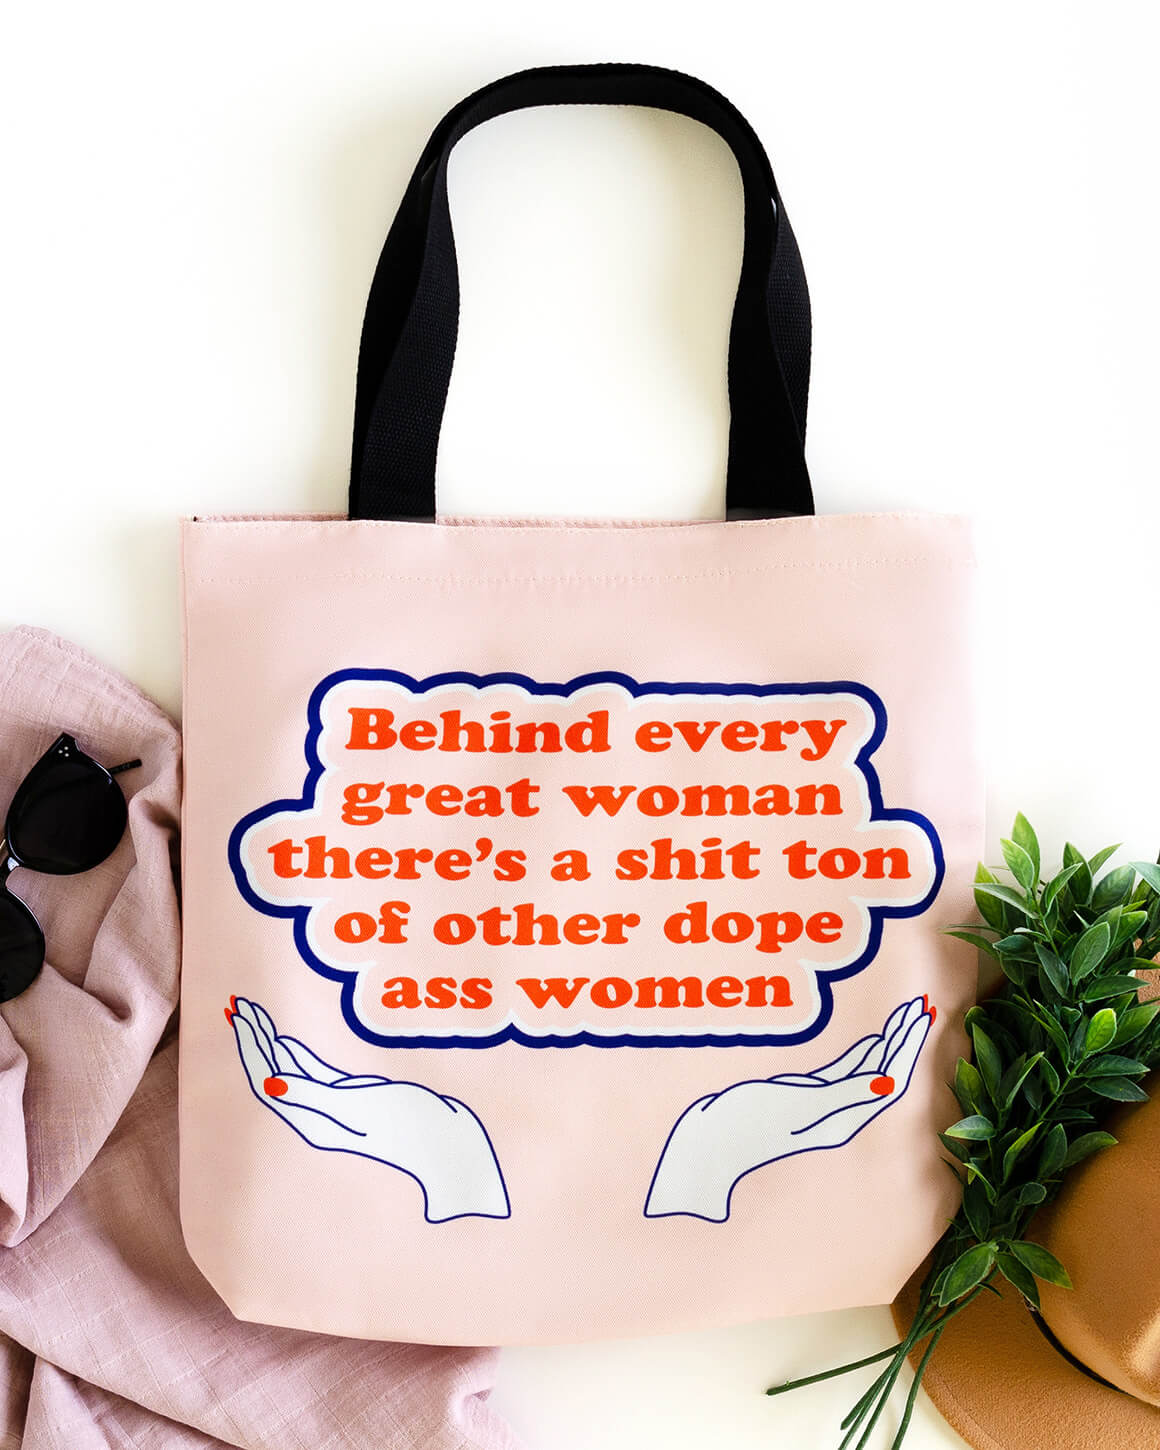 Behind every great woman tote bag for feminists